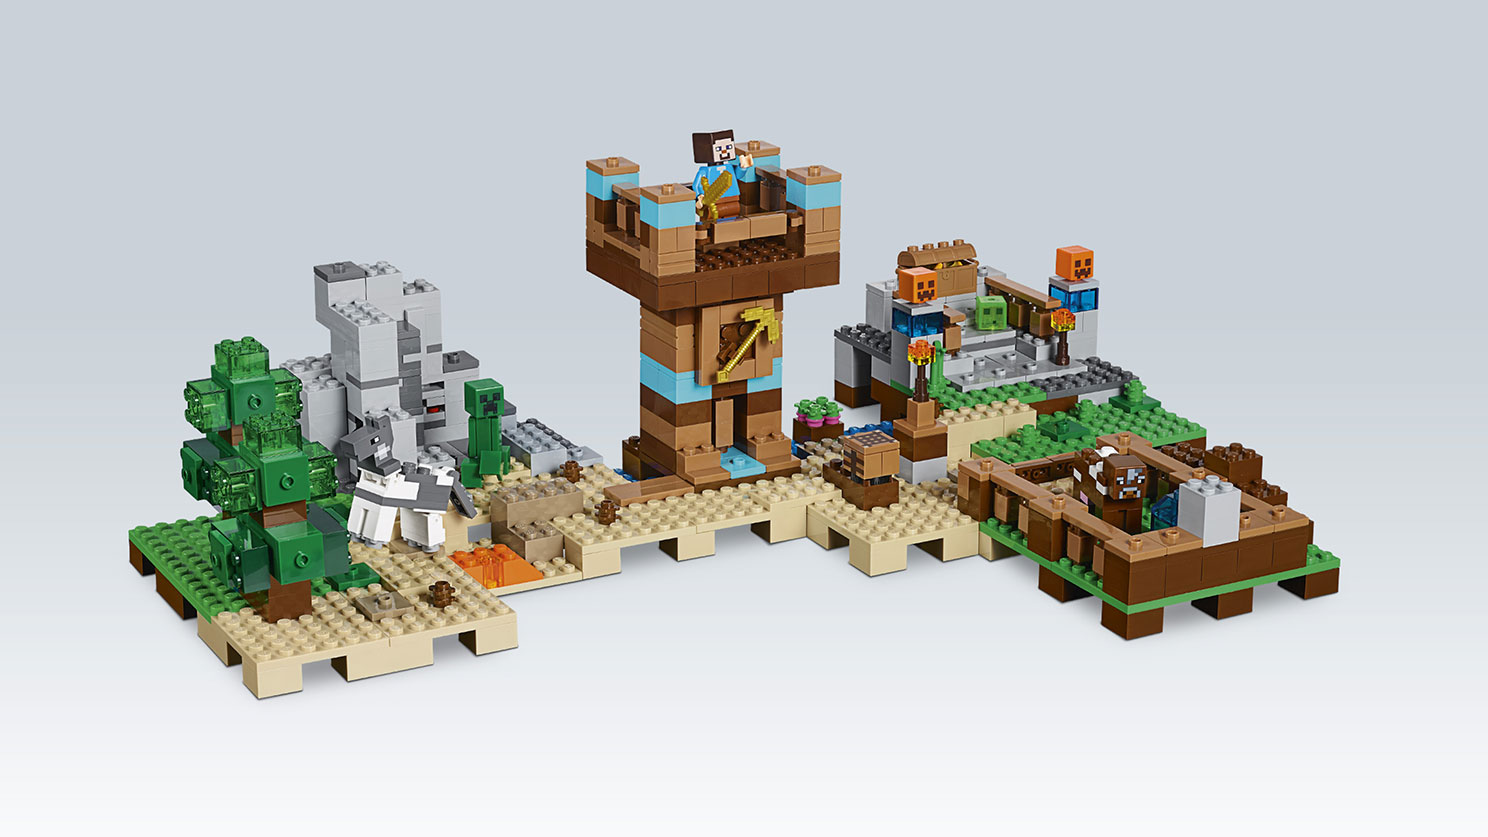 Implement overtale fup The Crafting Box 2.0 21135 - LEGO® Minecraft™ Sets - LEGO.com for kids